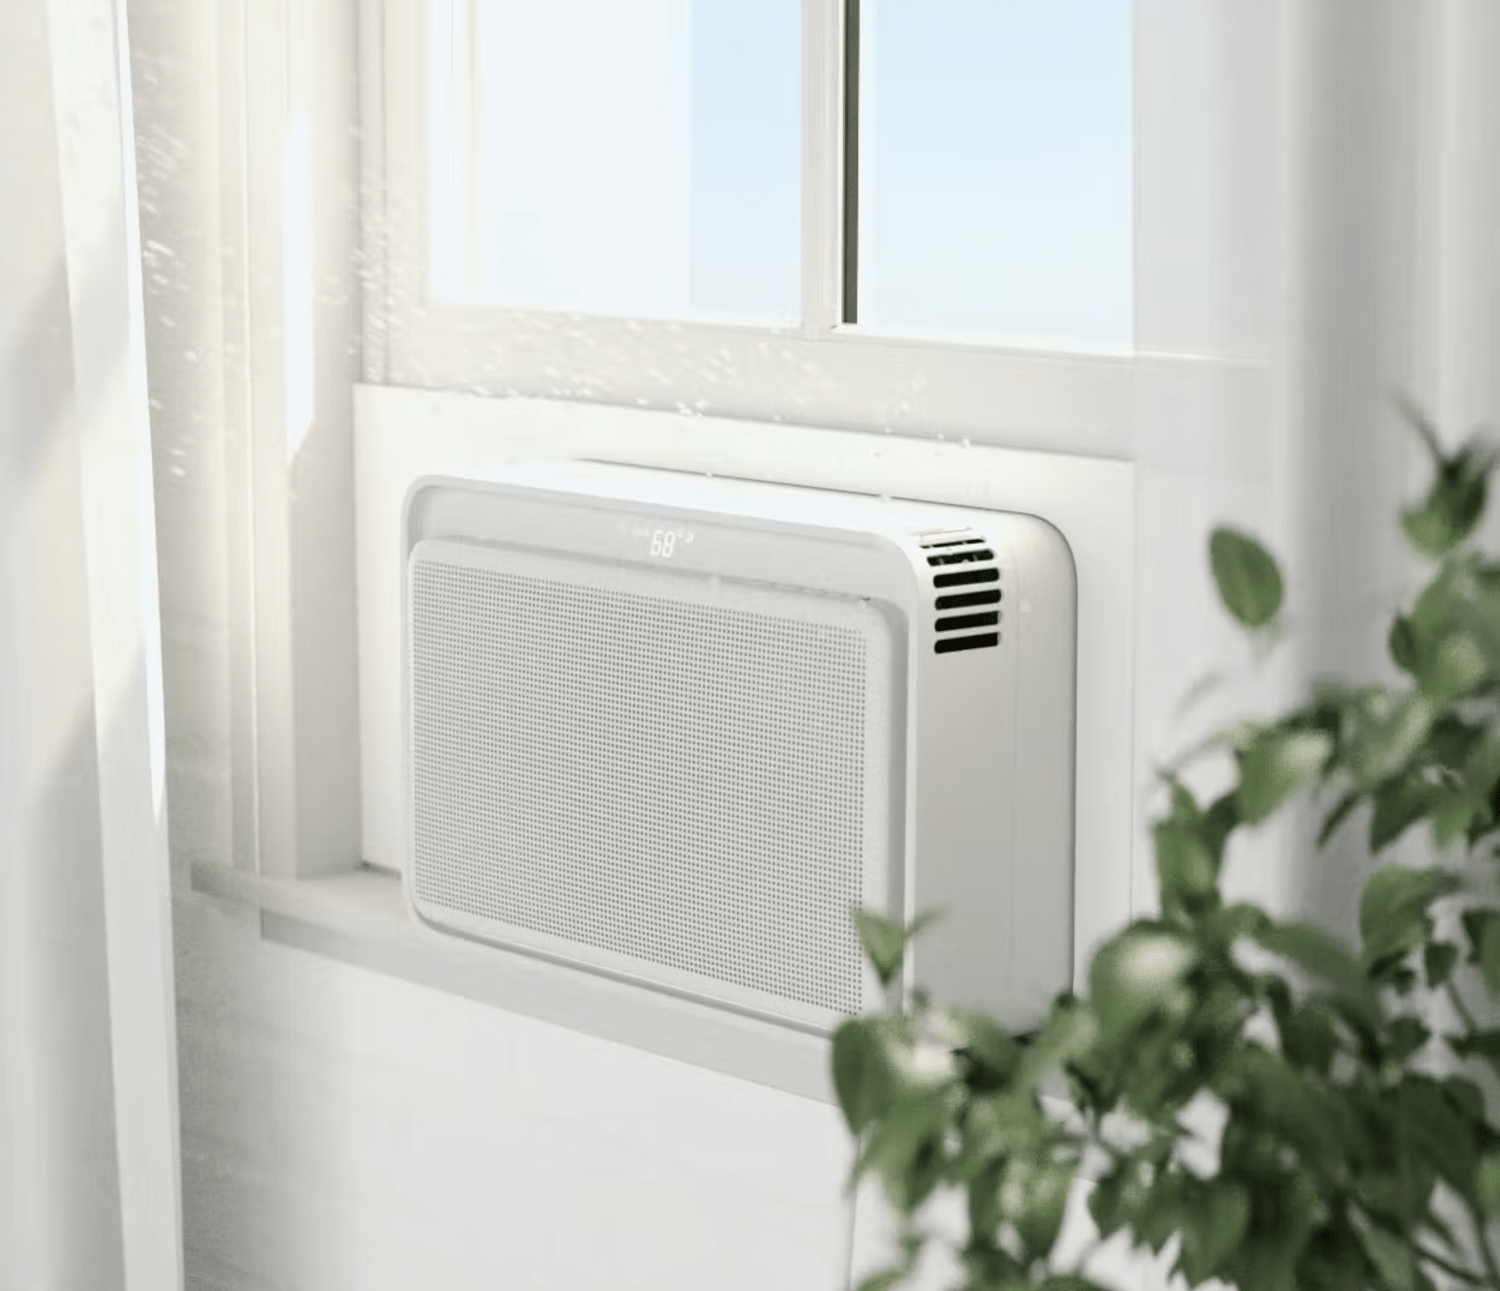 This portable air conditioner is over $100 off ahead of Prime Day